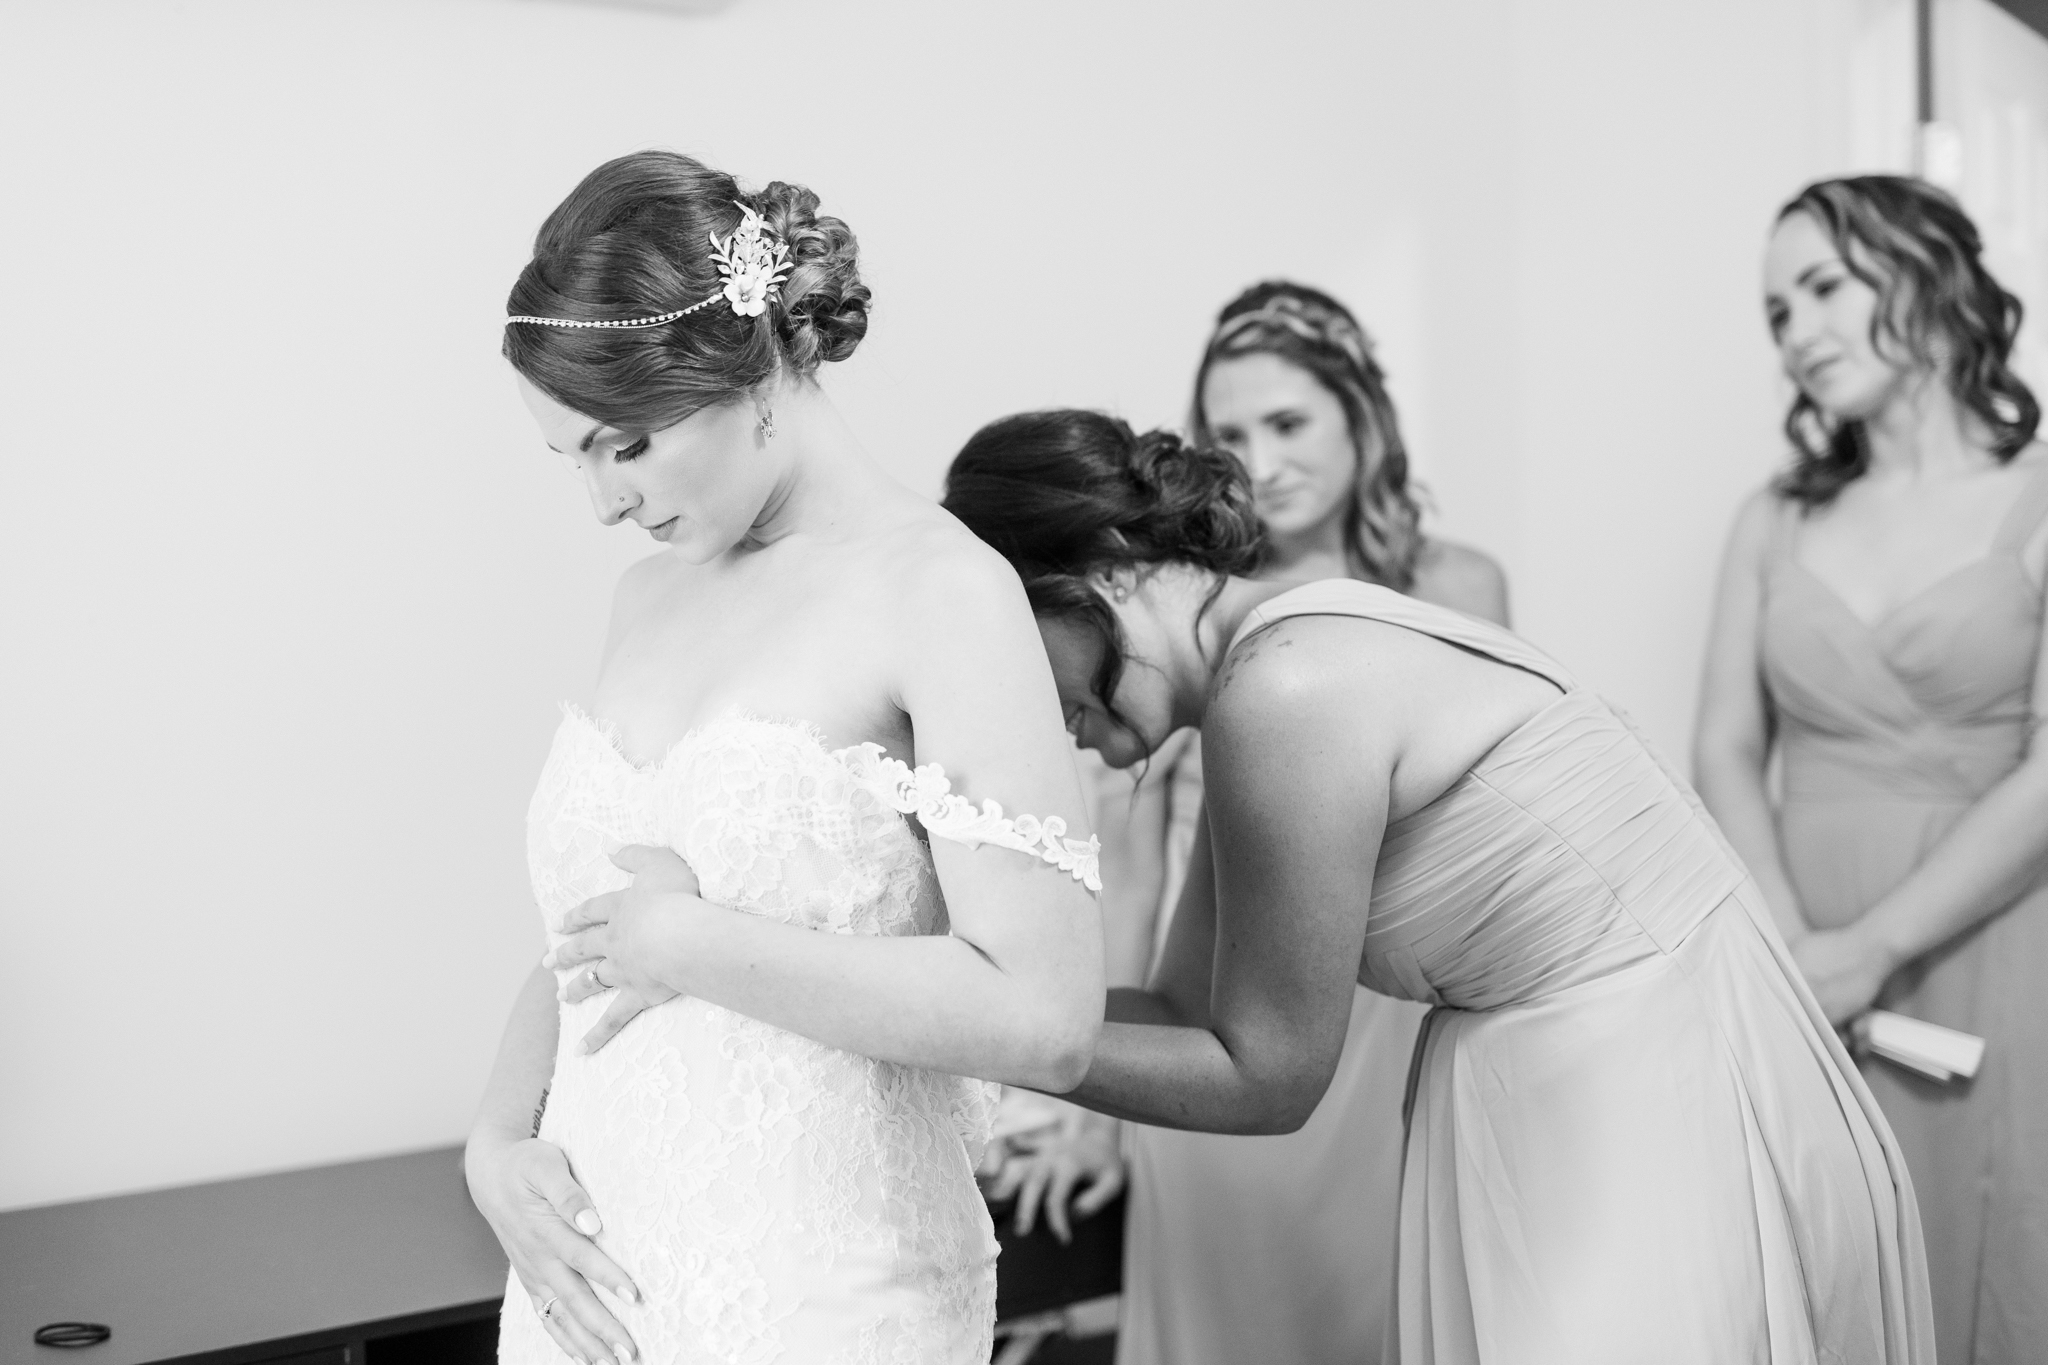 Maryland bride getting ready on her wedding day with her bridesmaids. Her bridesmaid is helping to tie her corset dress